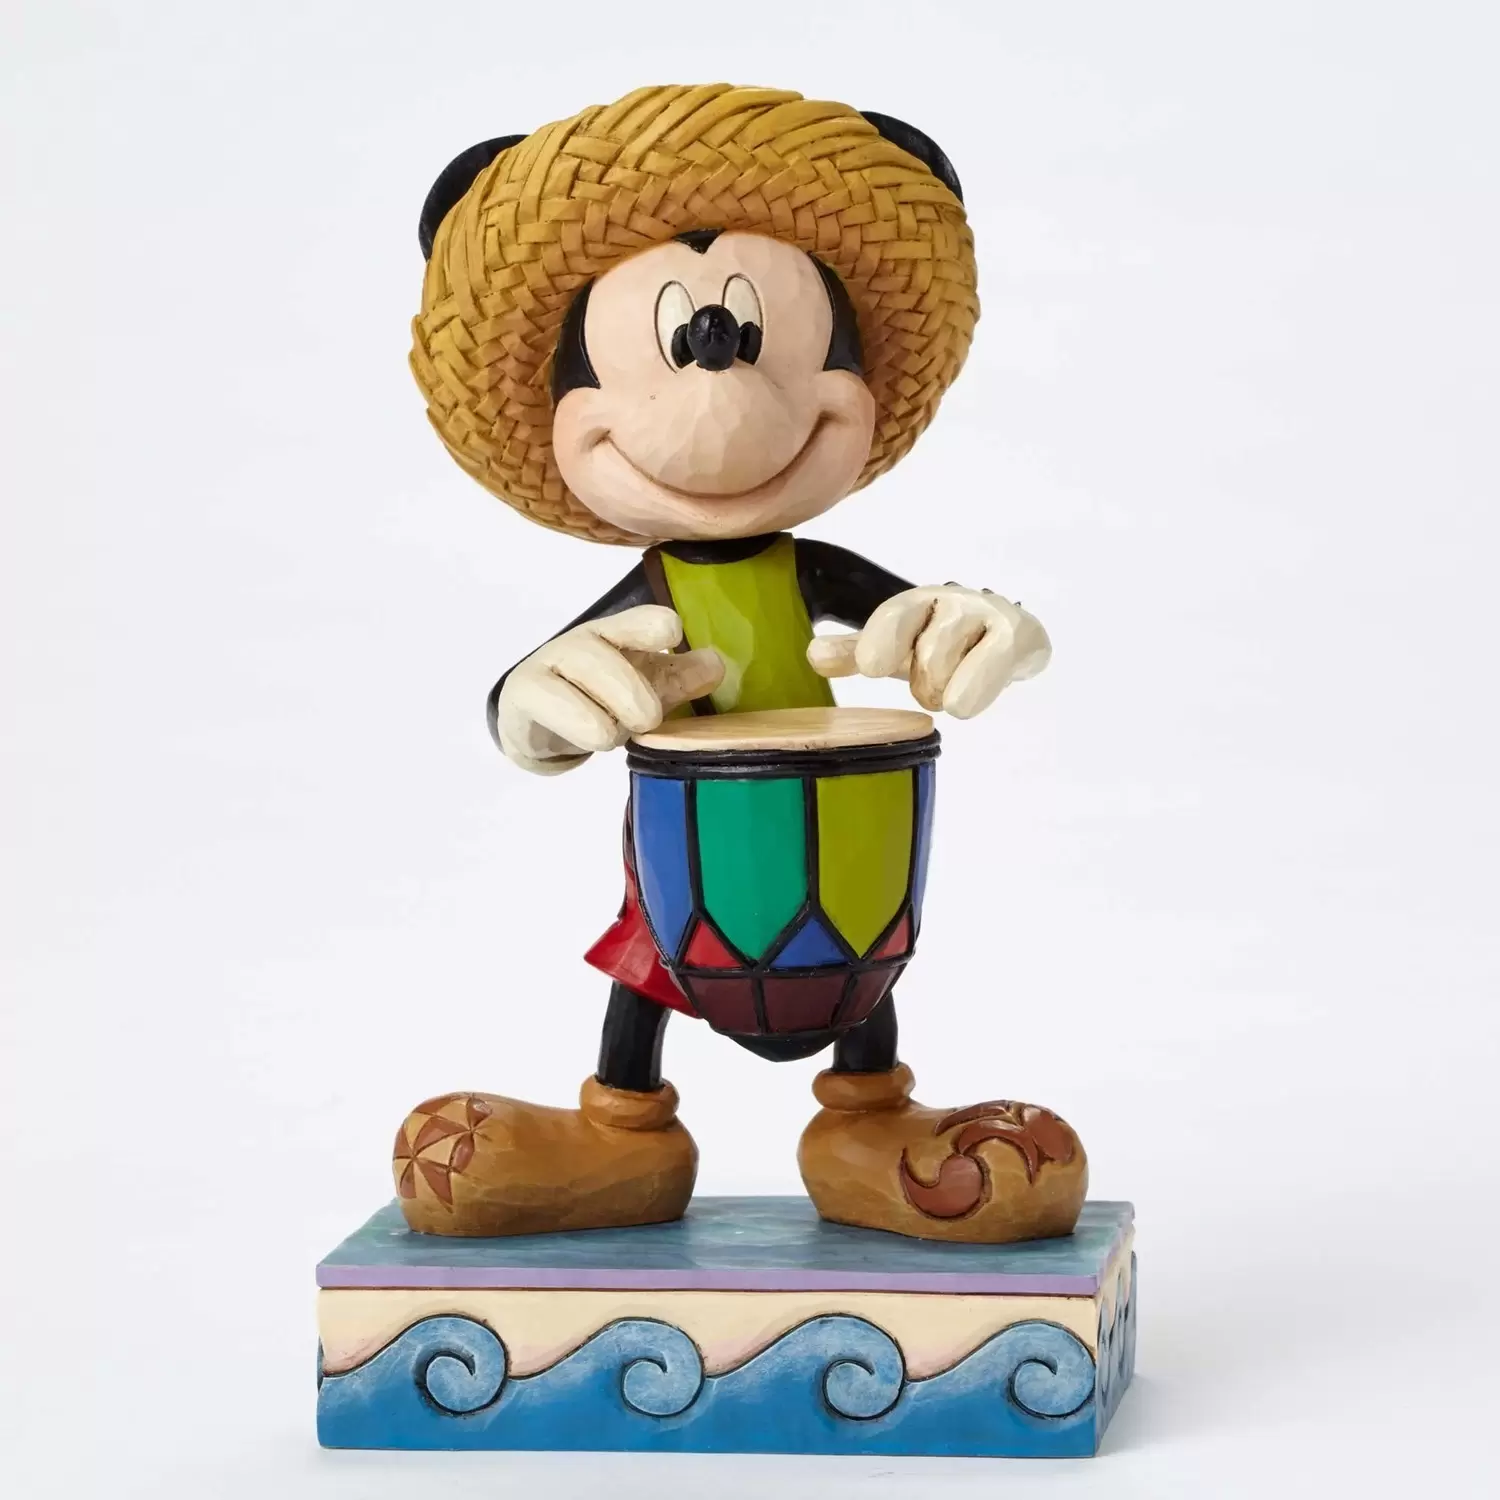 Disney Traditions by Jim Shore - Welcome to the Caribbean - Caribbean Mickey